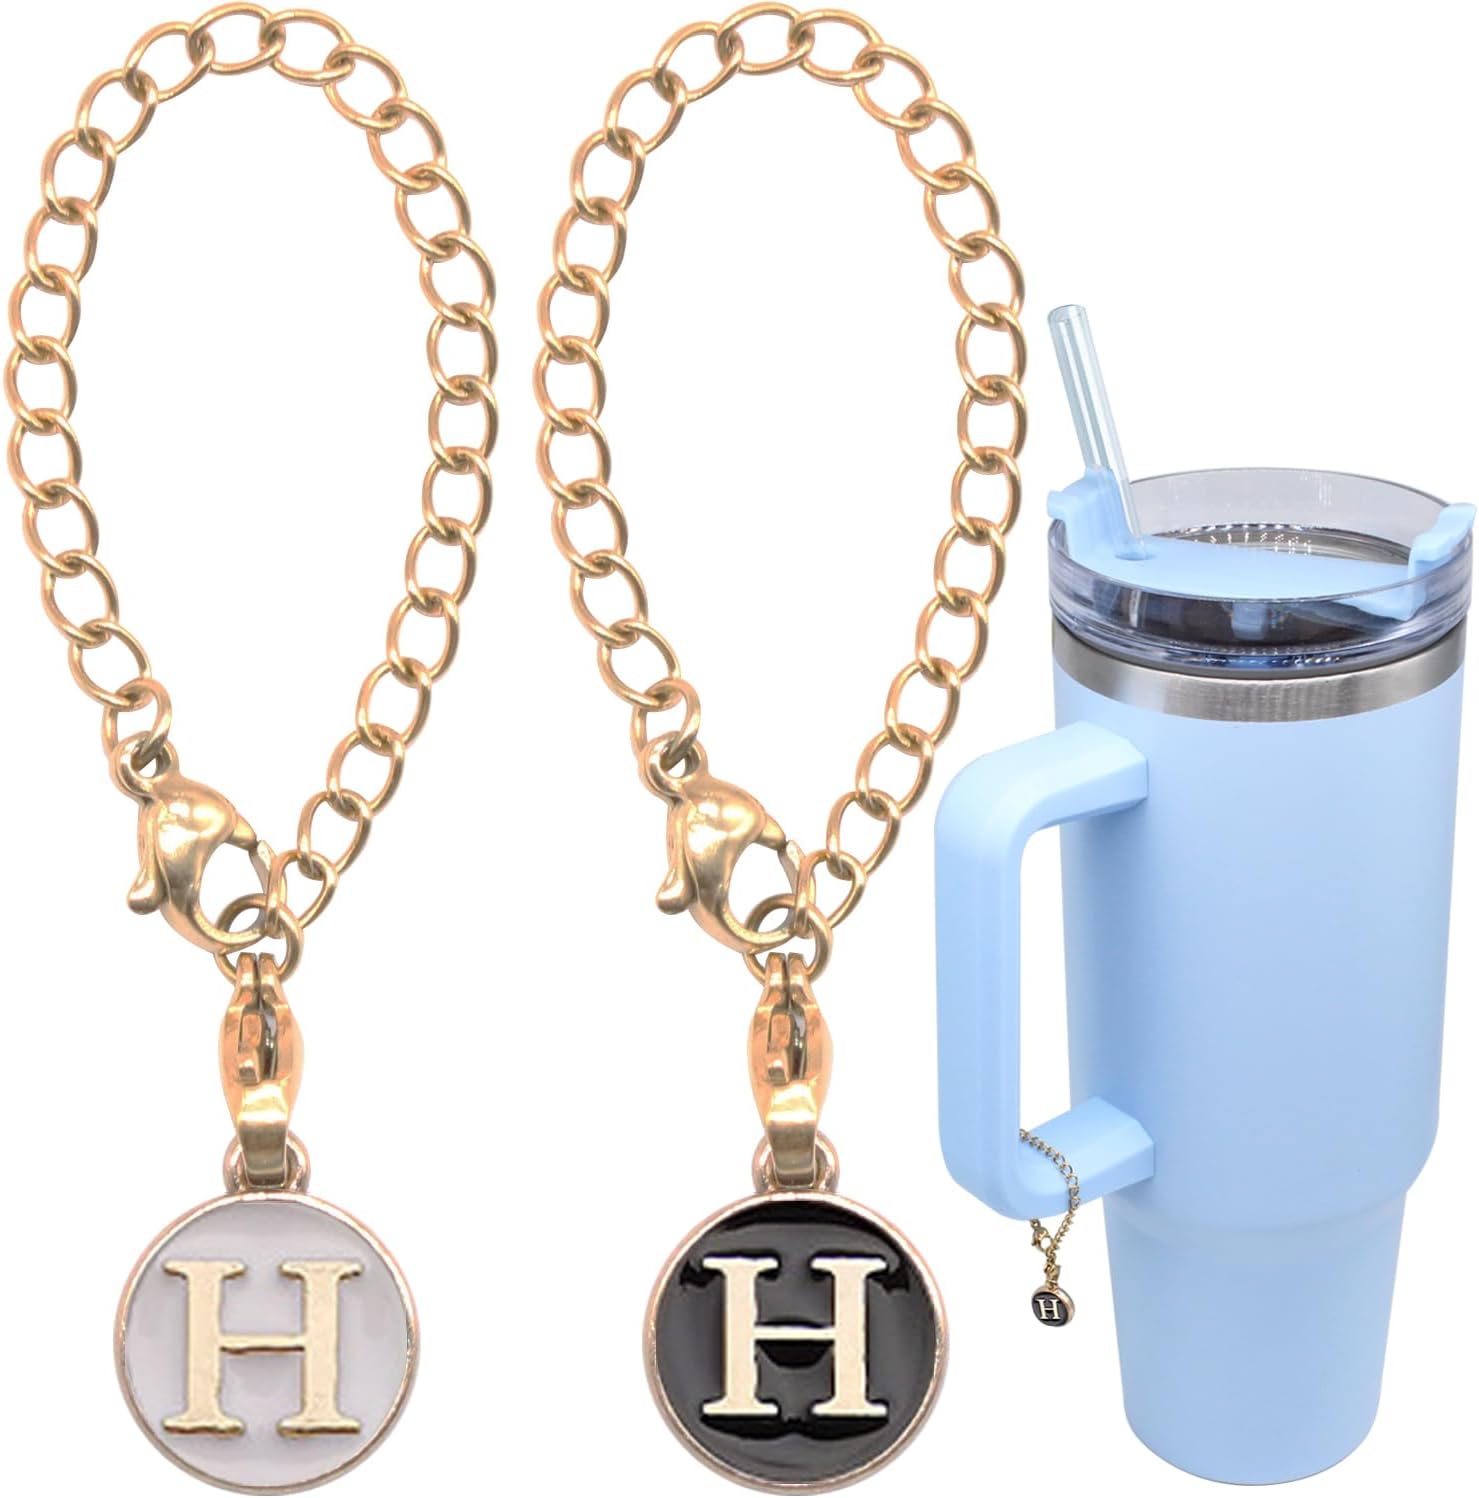 Letter Charm Accessories For Stanley Cup,2pcs Id Initial Letter Charm  Personalized For Stanley Tumbler Cup Identification Handle Letter Charms